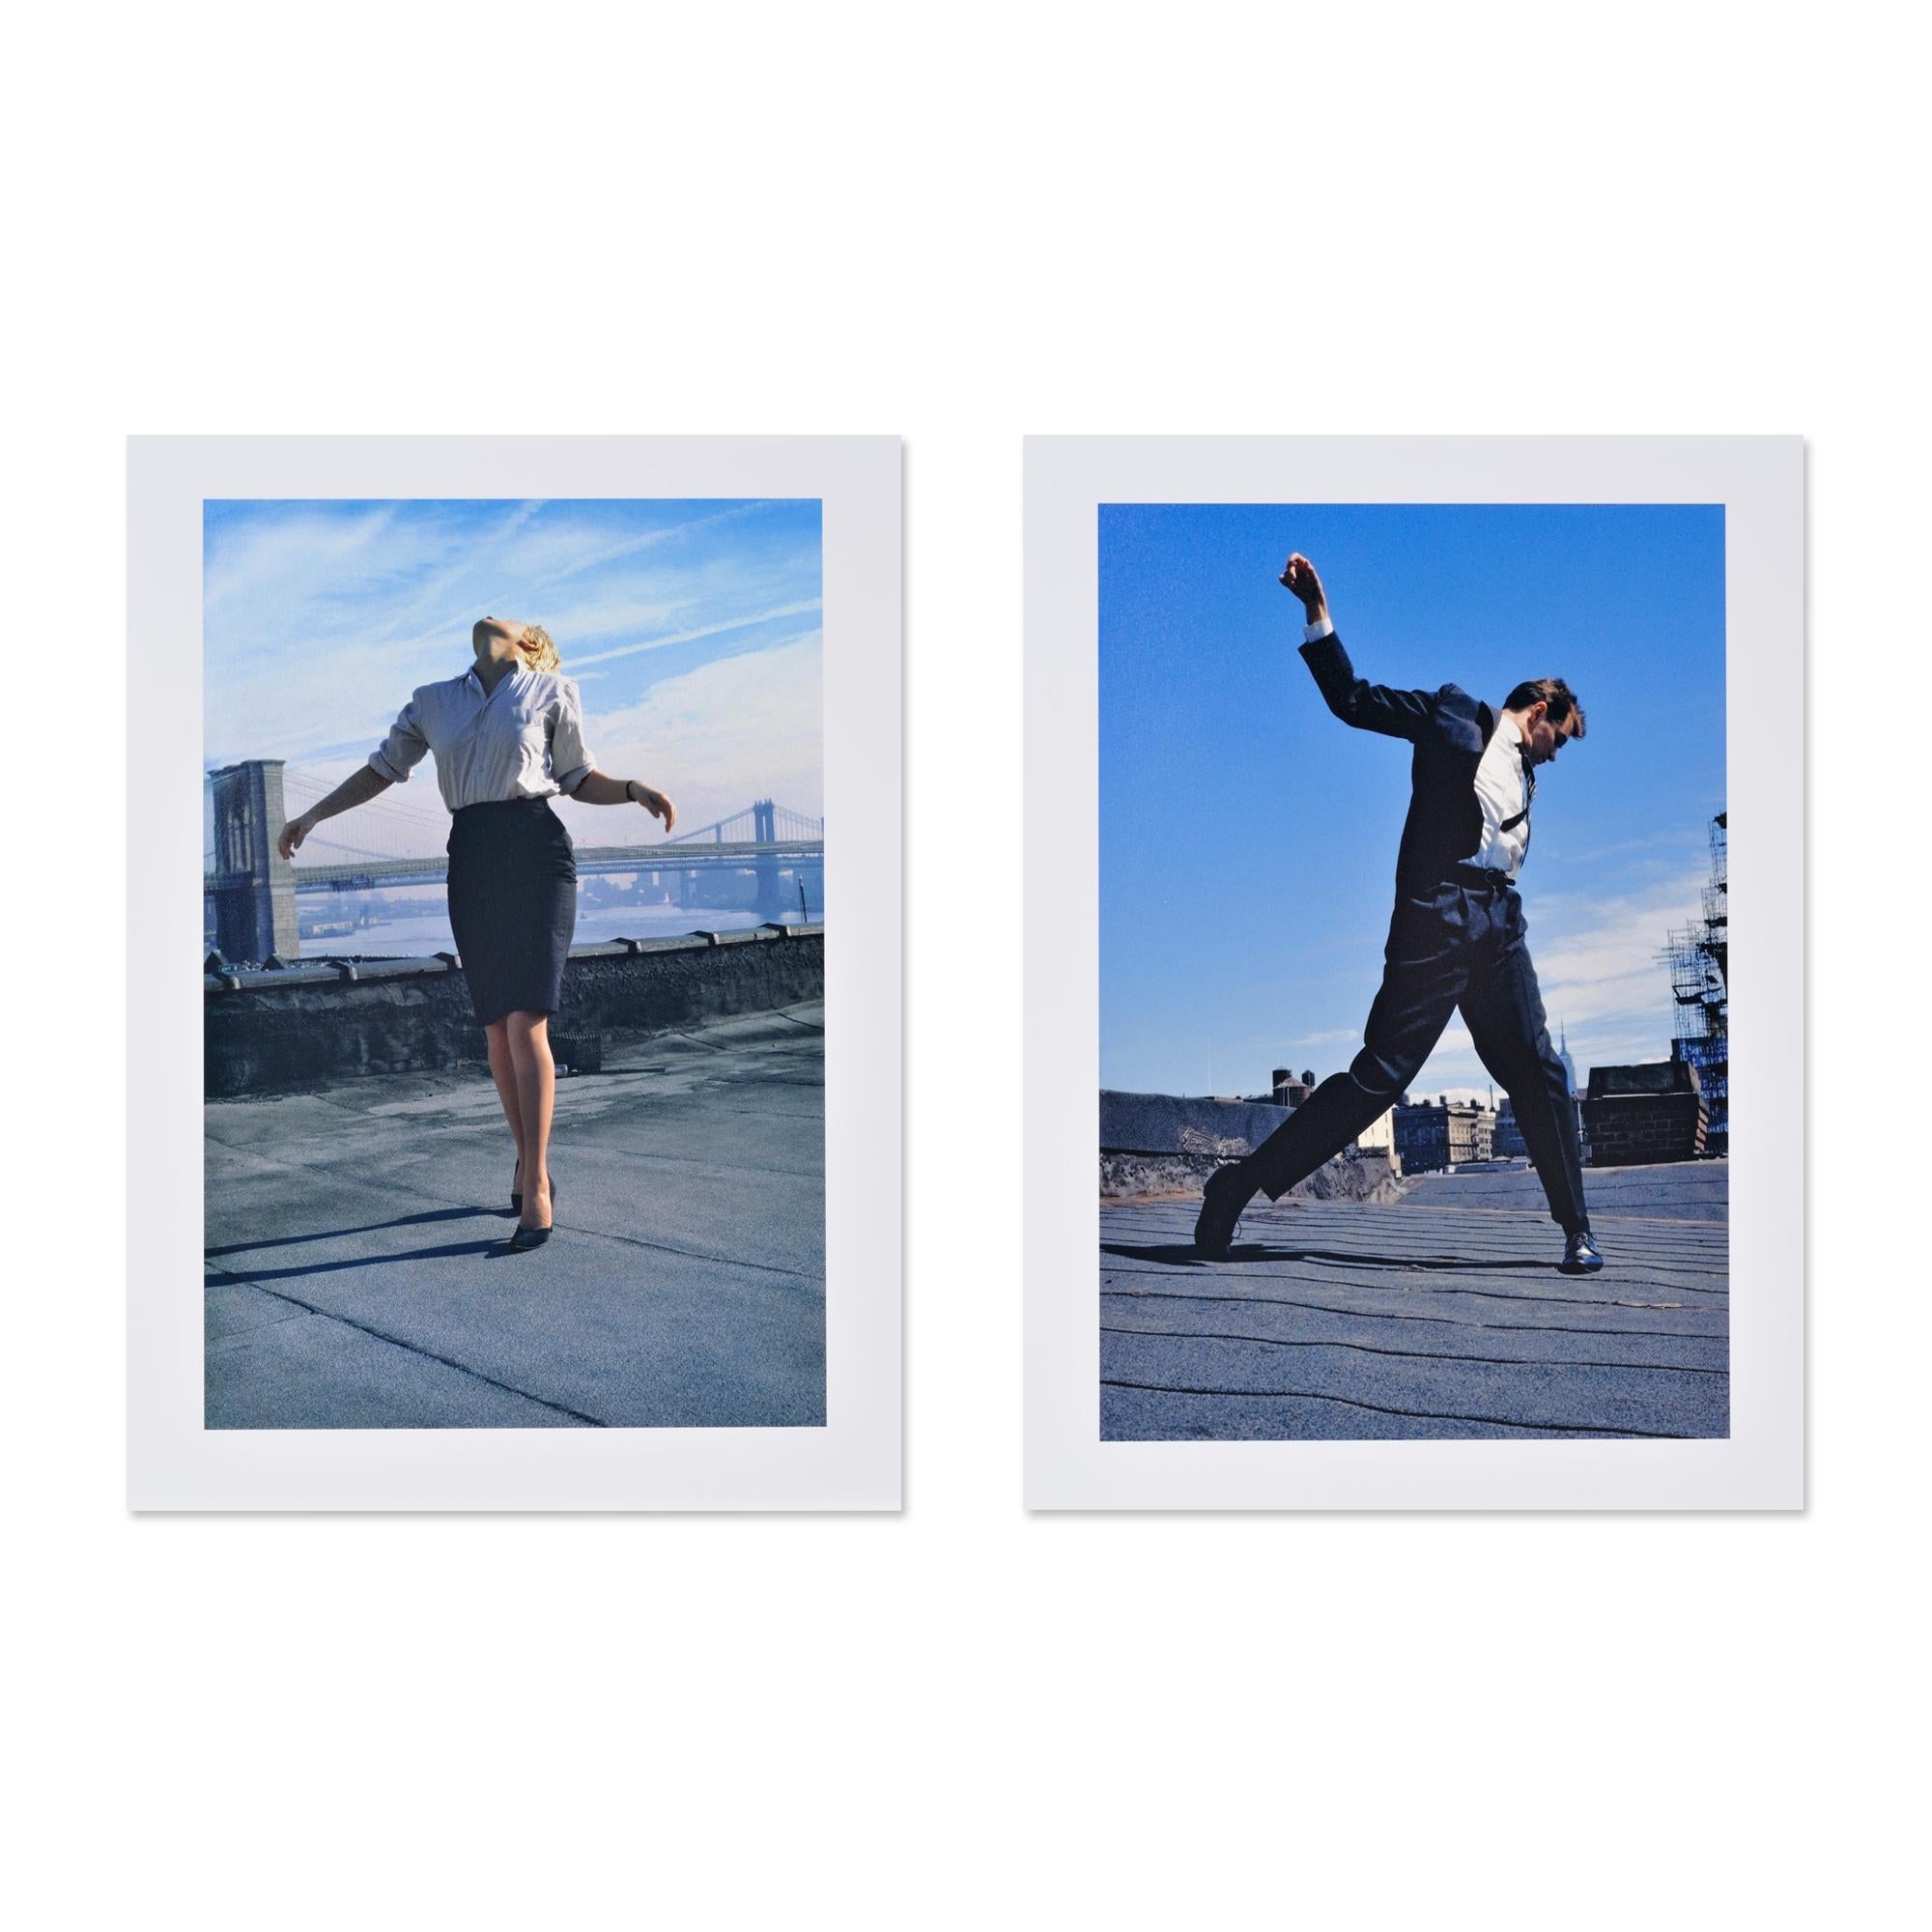 Robert Longo (American, born 1953)
Cindy and Eric, 2014
Medium: Set of 2 archival pigment prints
Dimensions: each 45.5 × 35.3 cm
Edition of 75: Signed, numbered and dated
Condition: Excellent